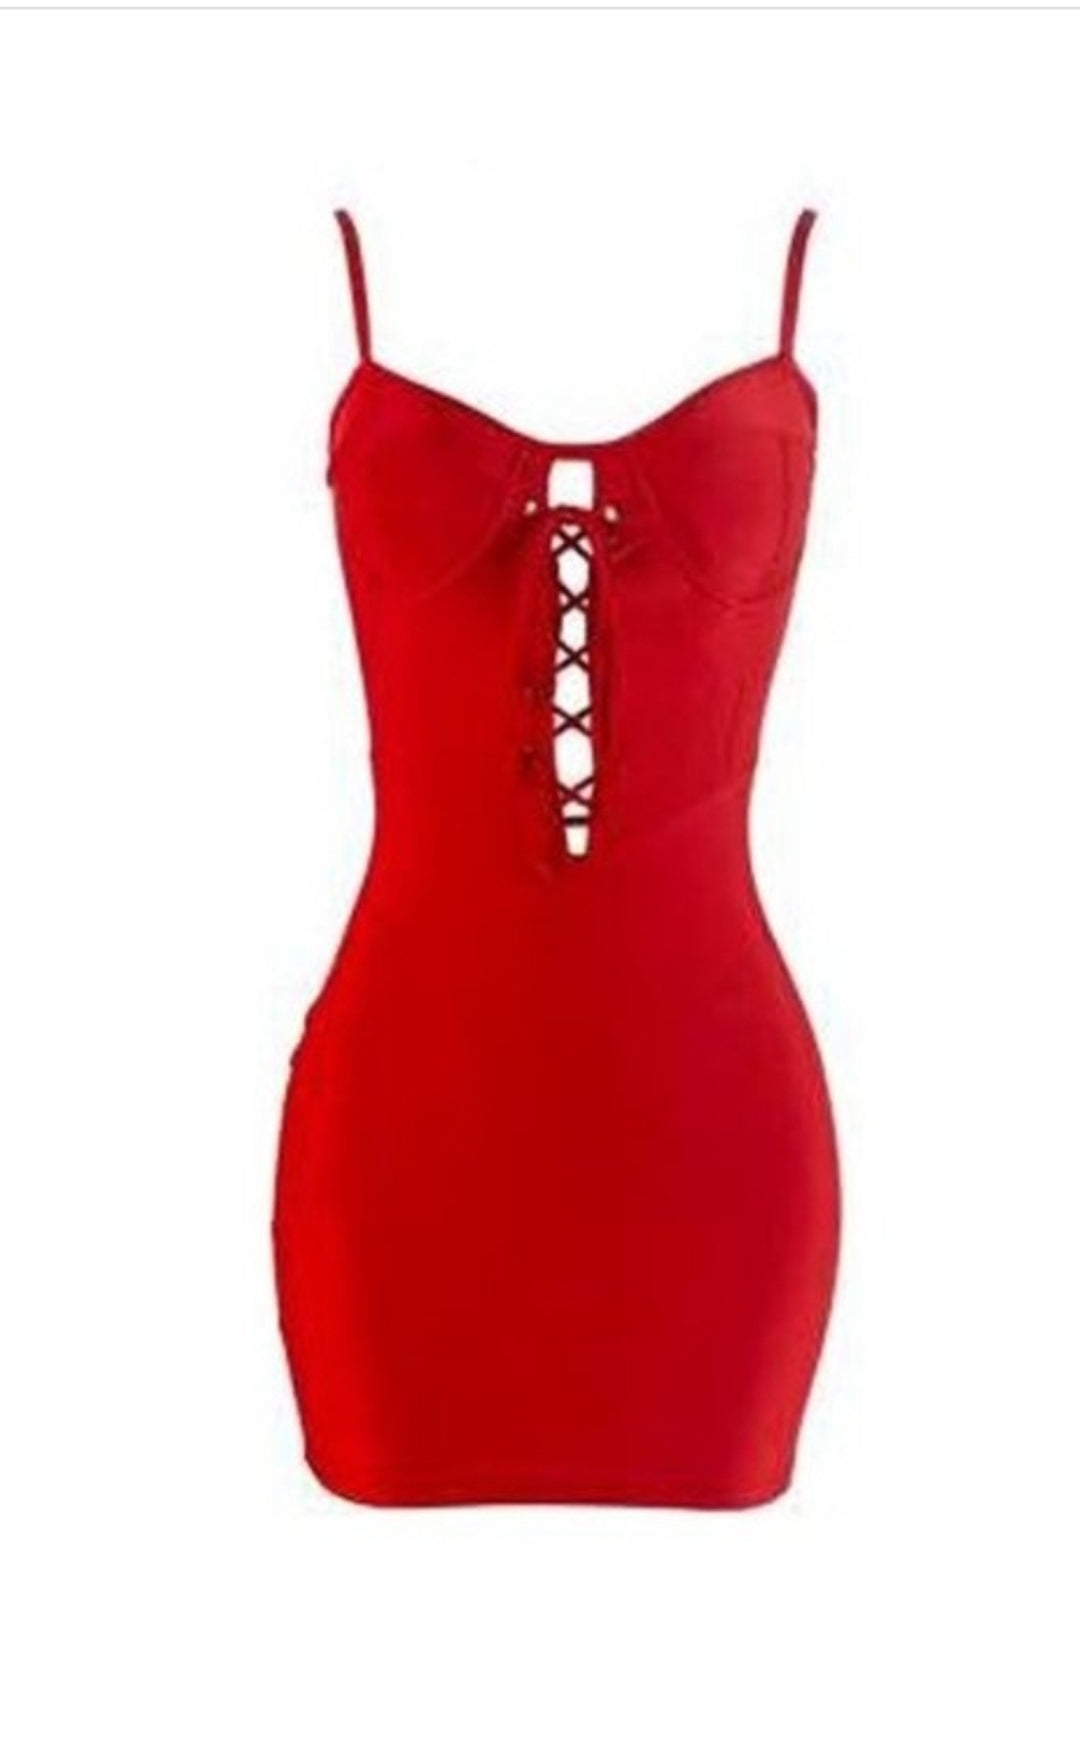 Red corset style dress